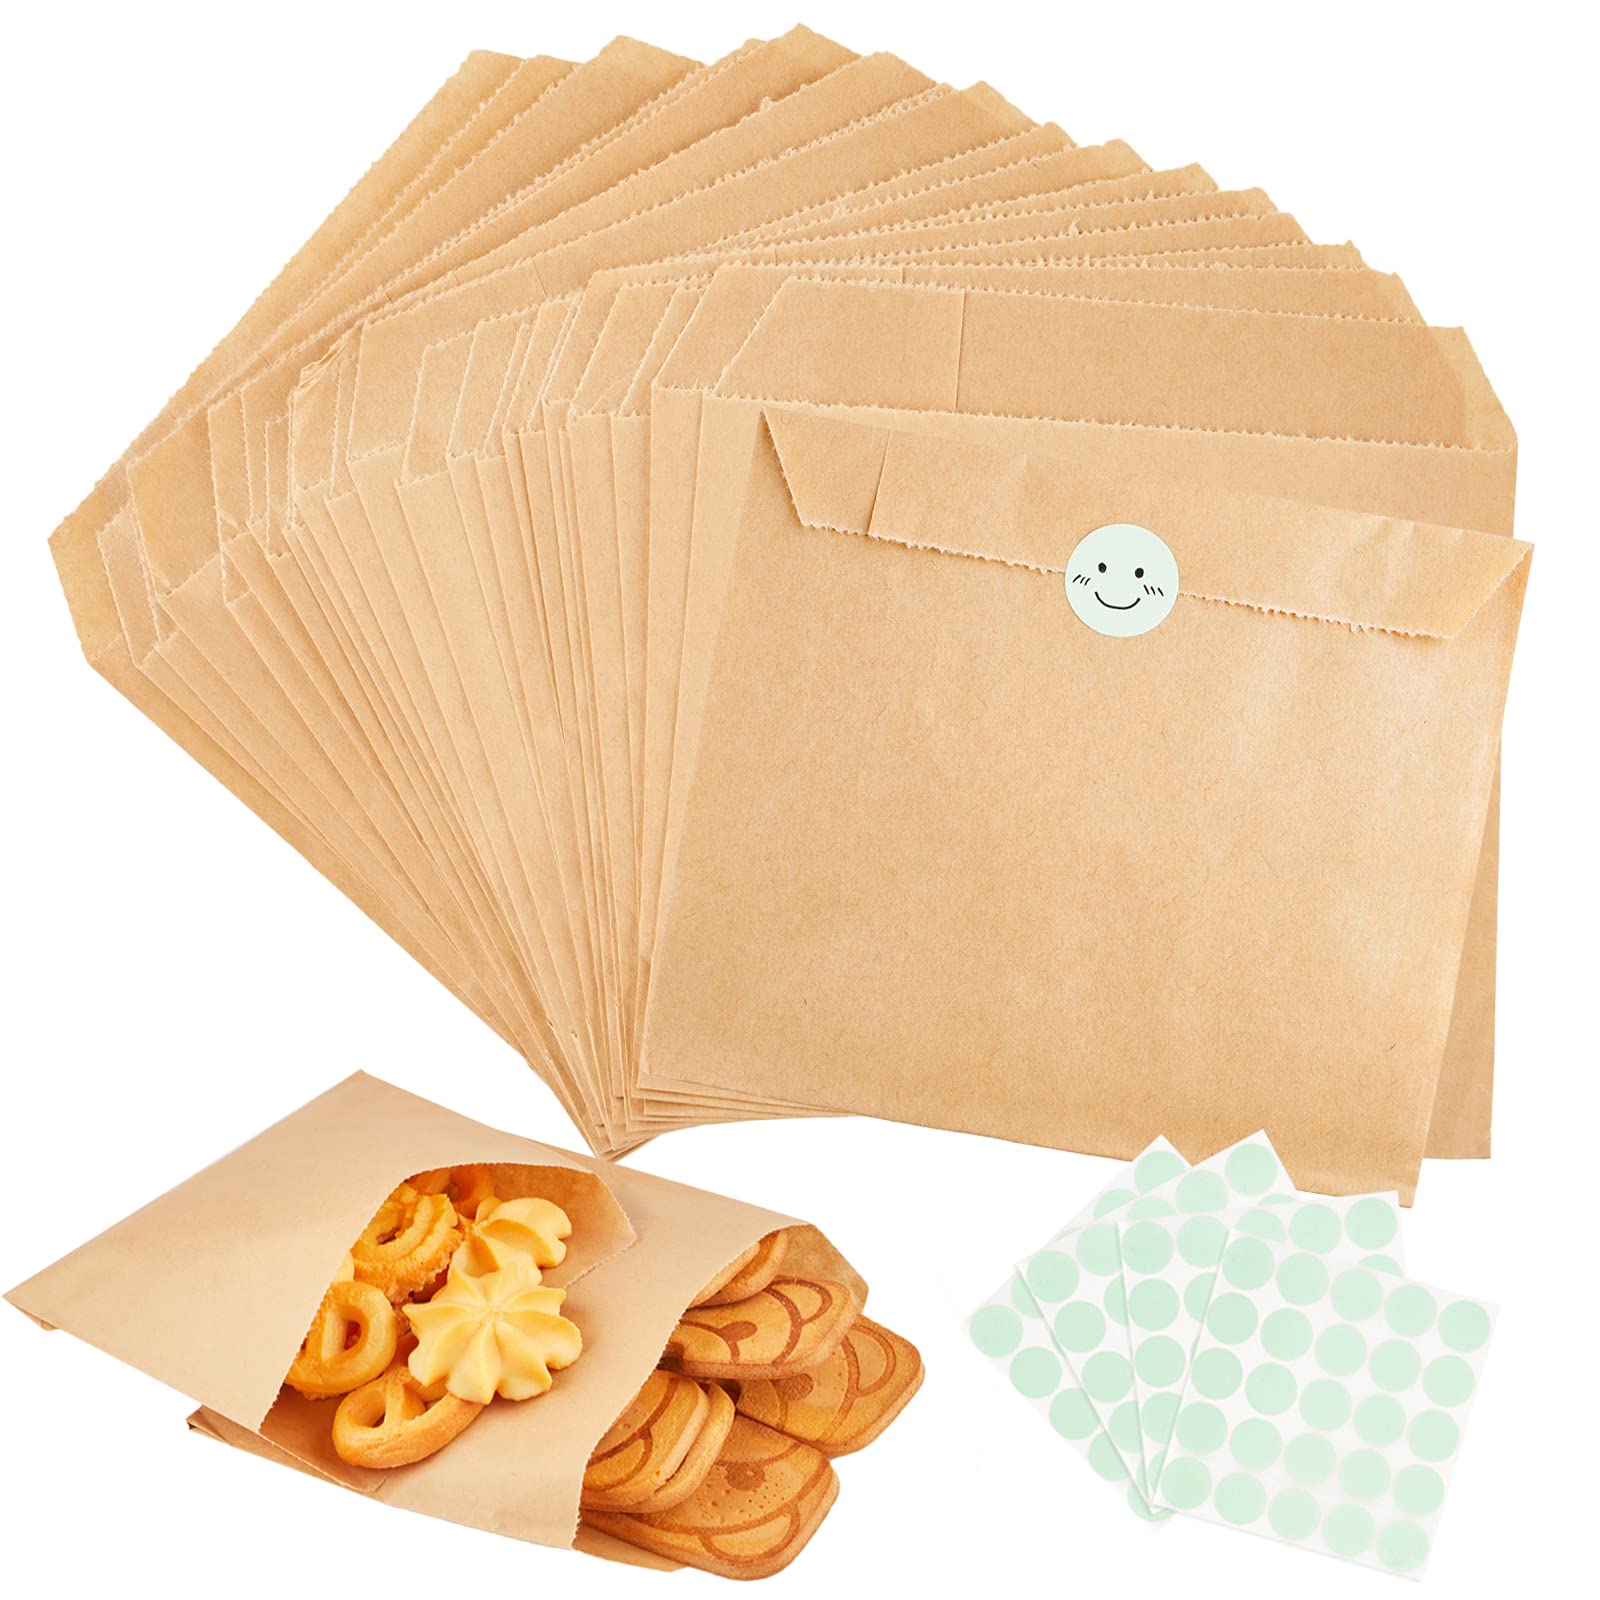 Biodegradable Paper Packaging For Cookies